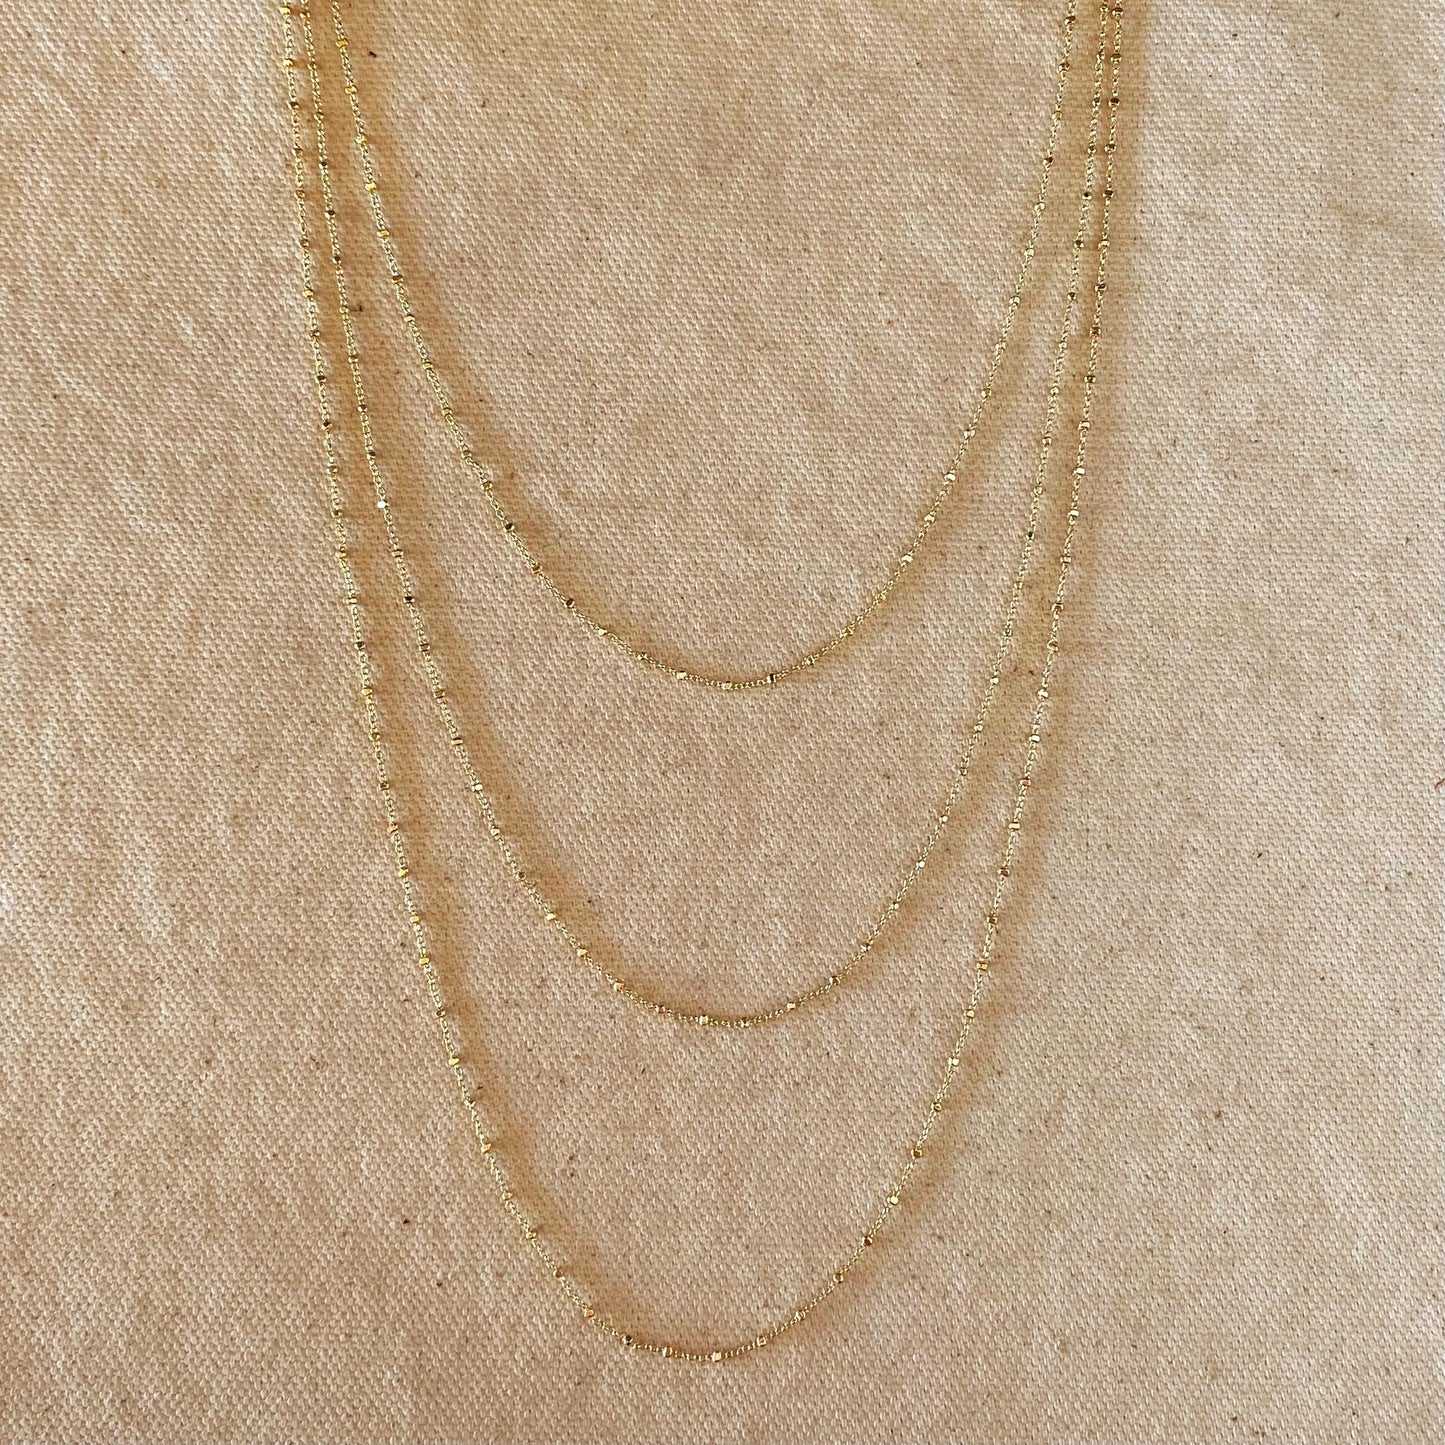 18k Gold Filled 1mm Spaced Beaded Chain